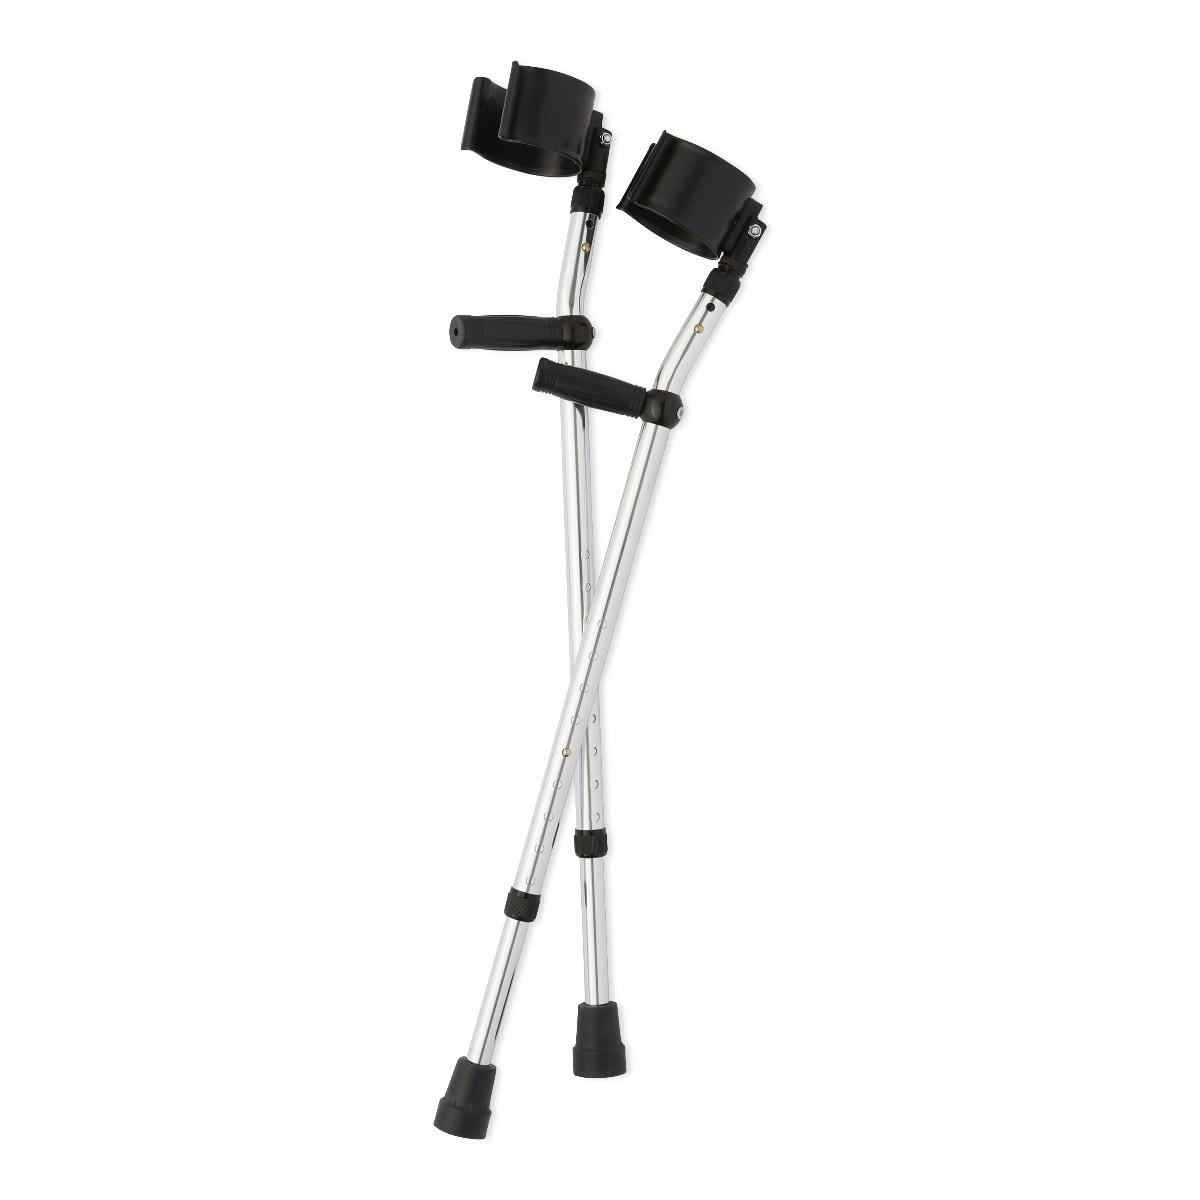 Medline Guardian Aluminum Forearm Crutches, G05162Y, Youth (4'2" - 5'2") - 1 Pair